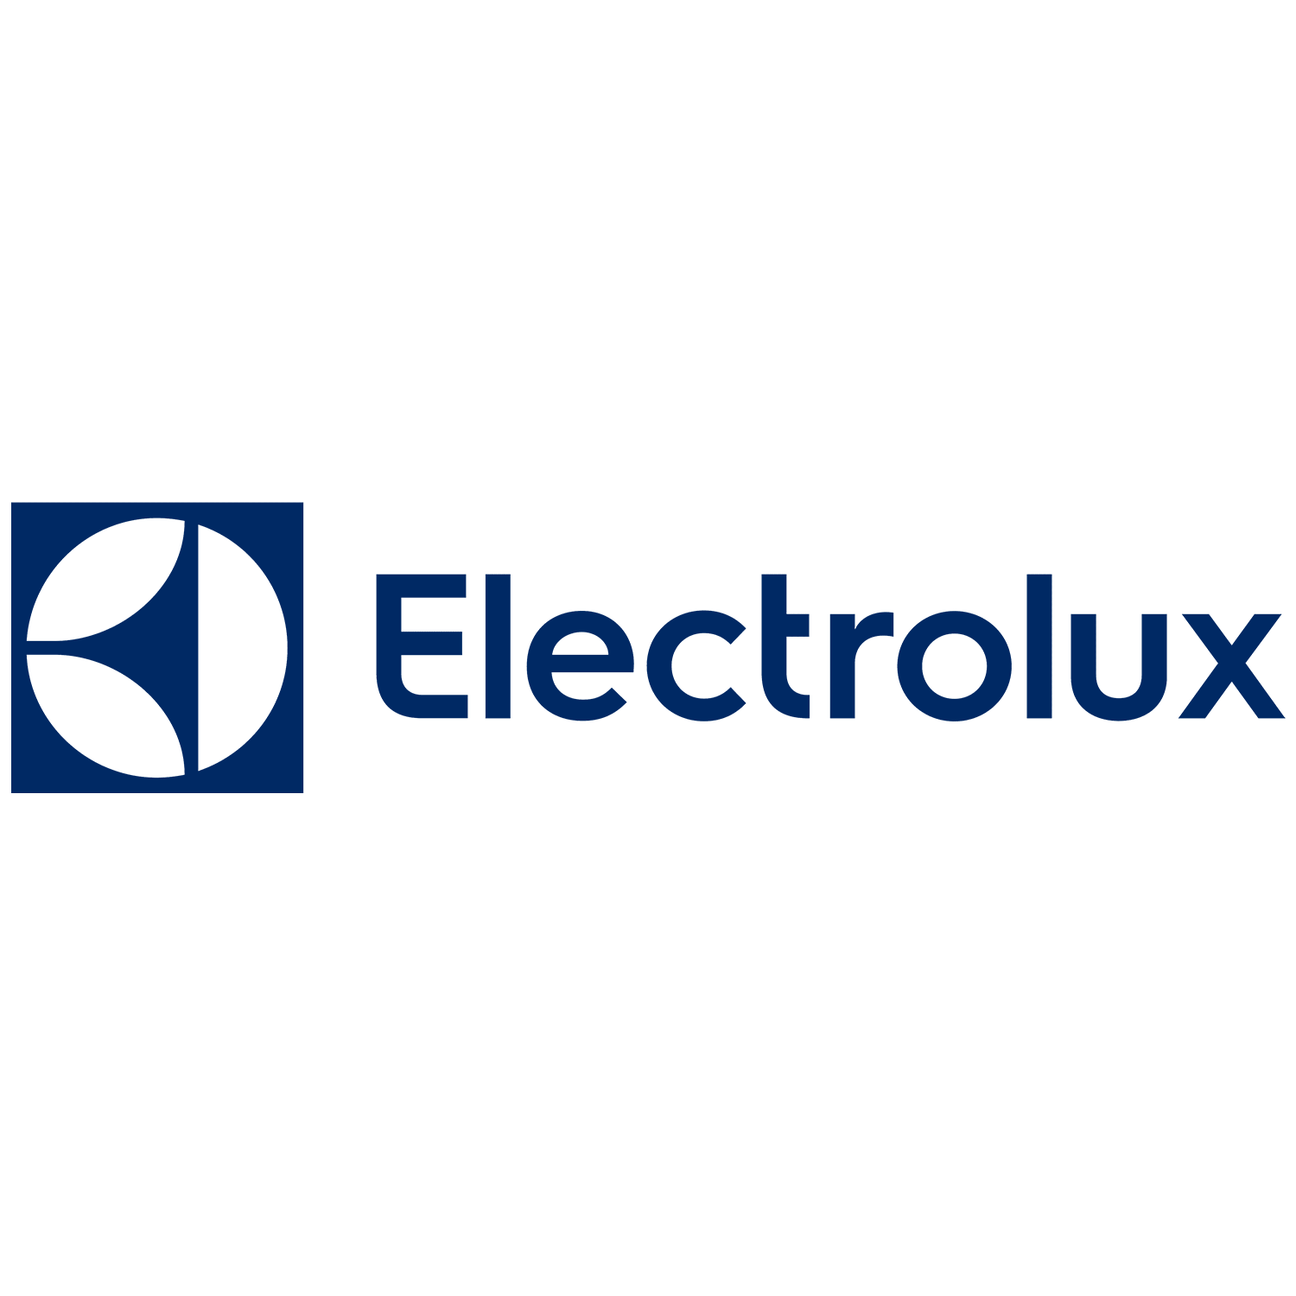 Electrolux Cooktop & Oven Parts - My Oven Spares